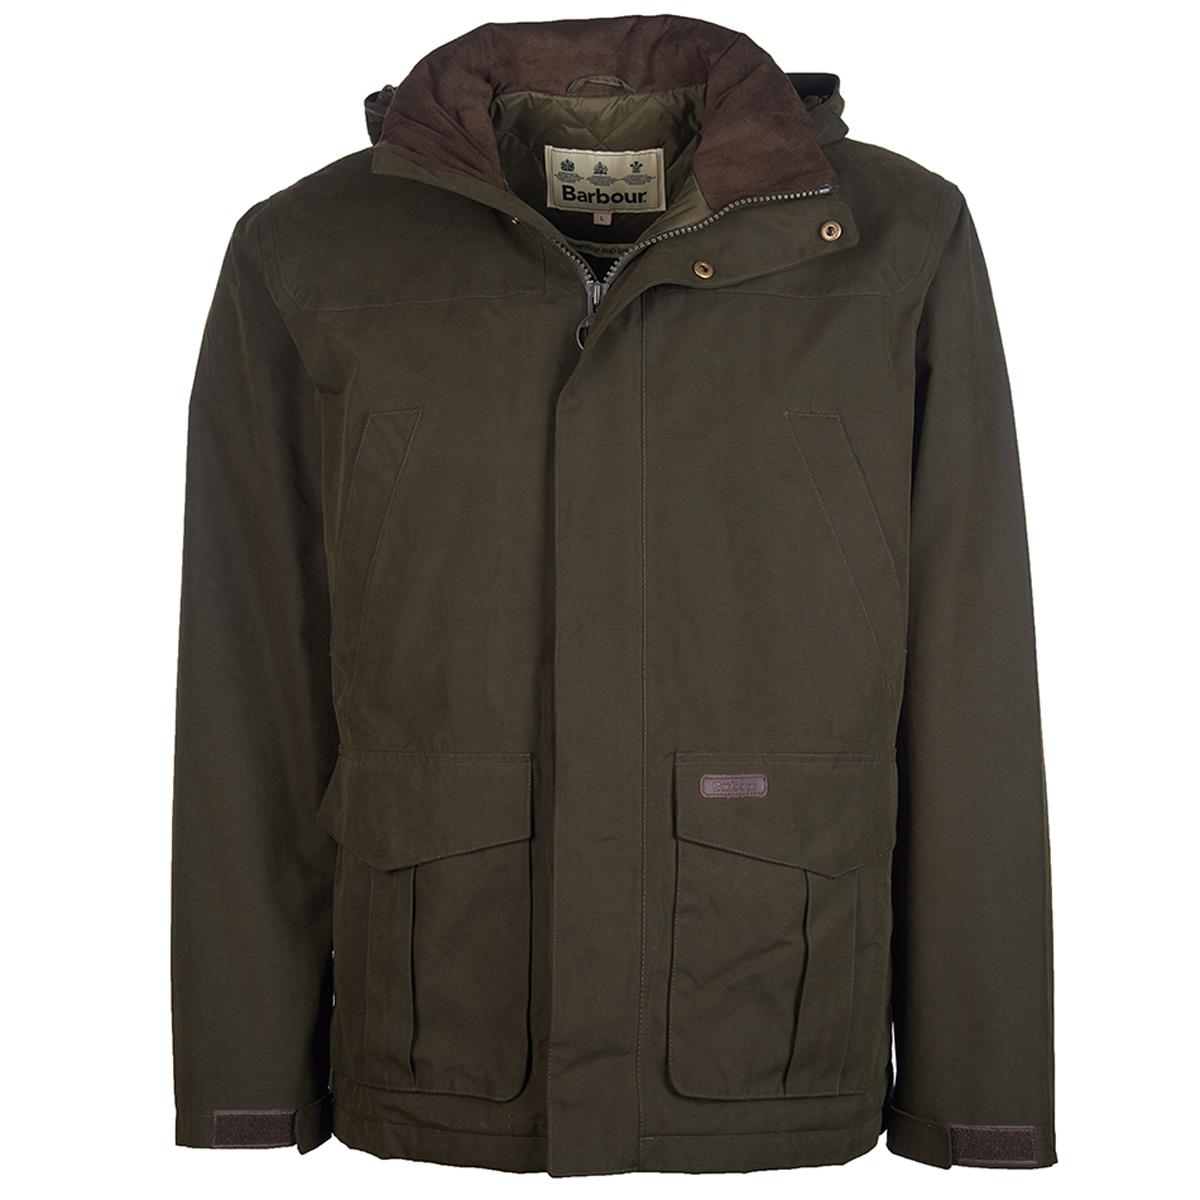 What is the PM reference for the Barbour Brockstone Jacket?